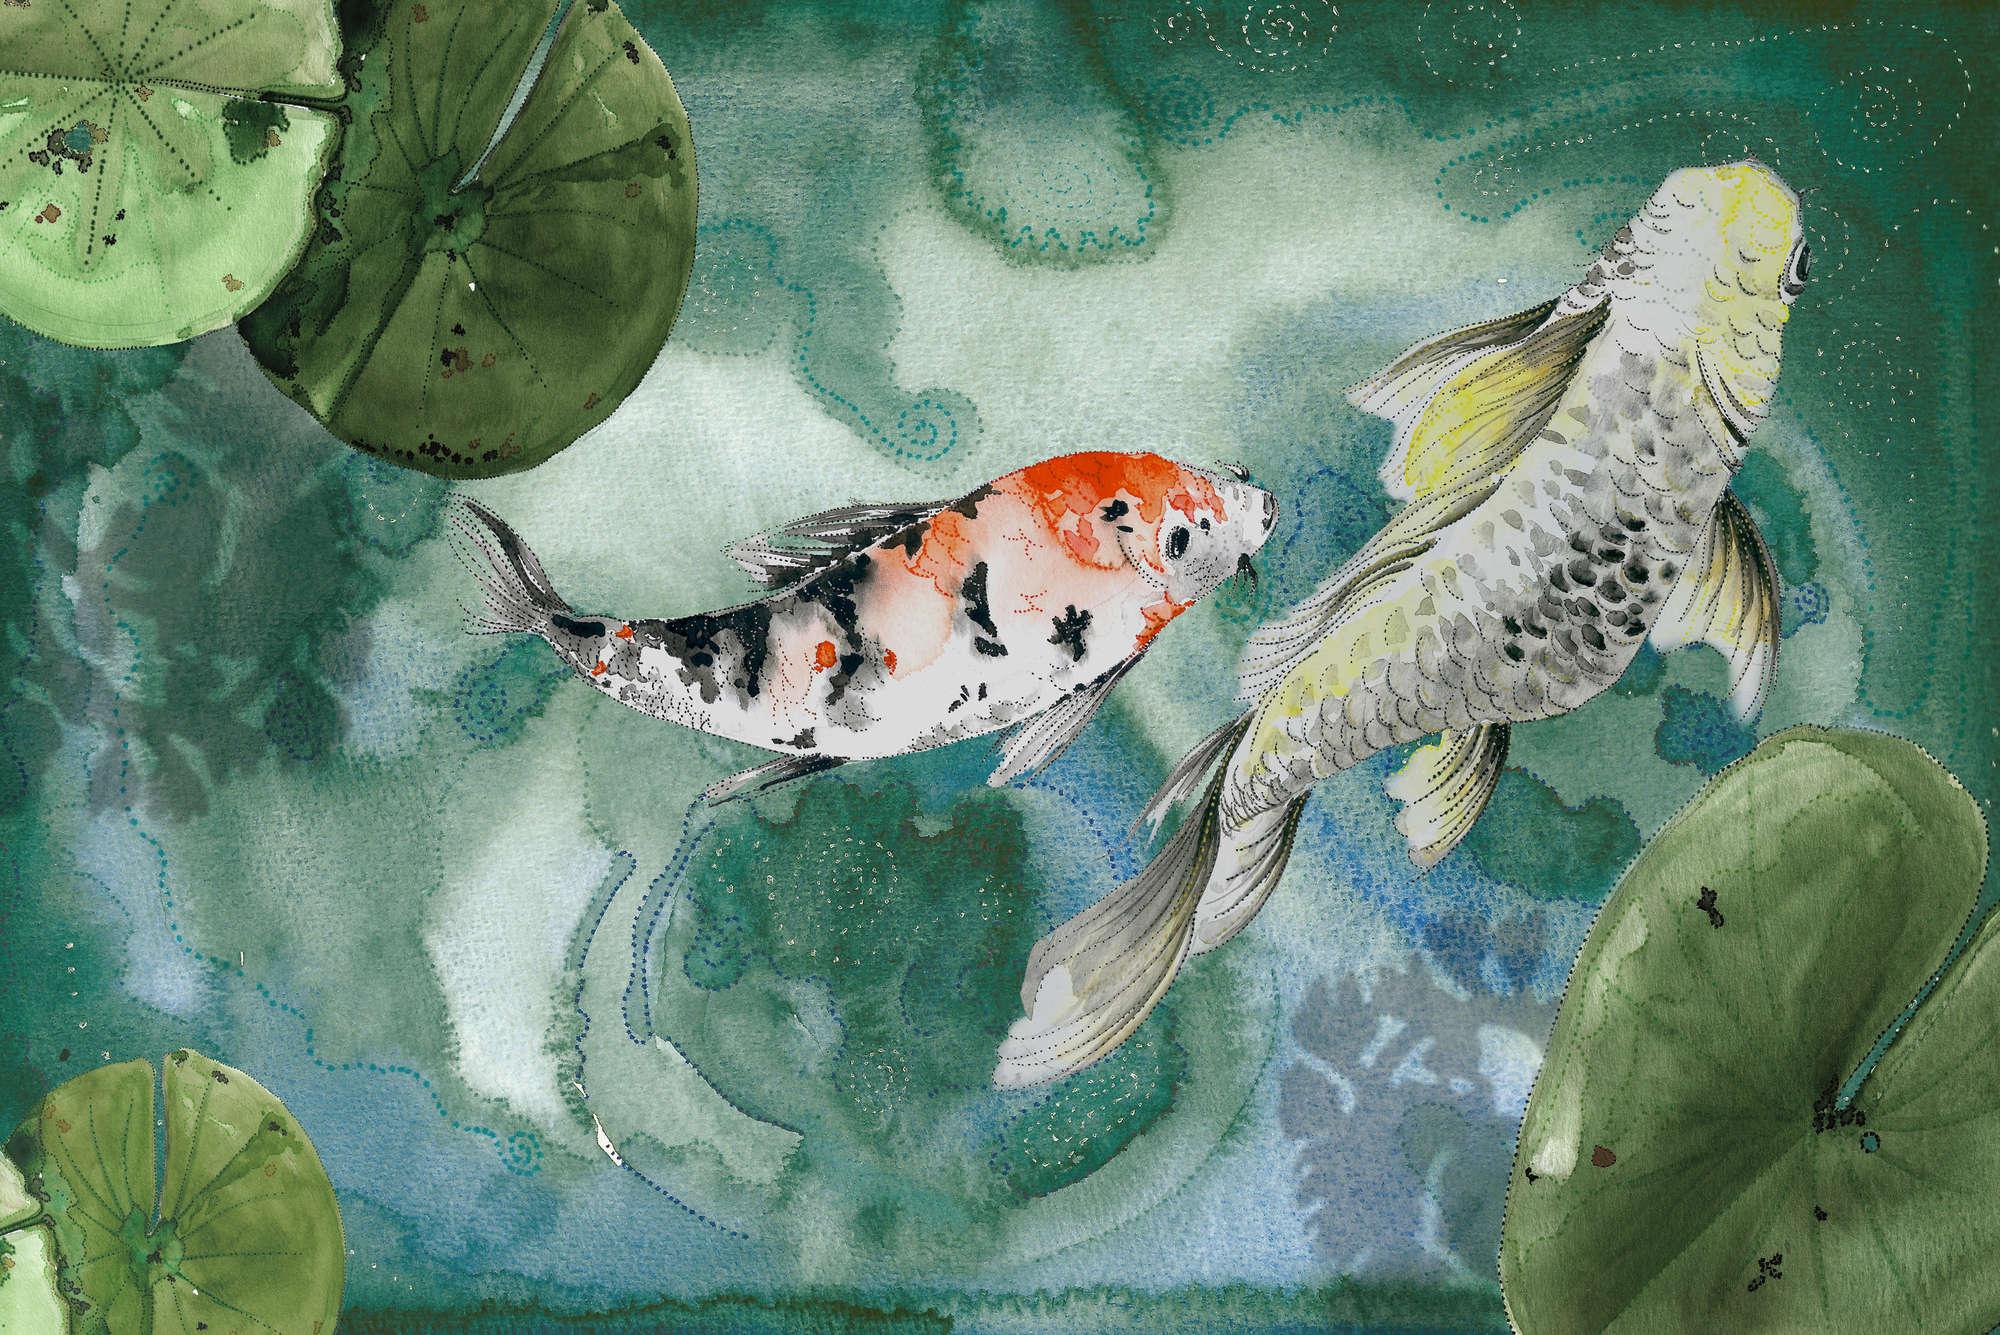             Koi watercolour style mural on mother of pearl smooth vinyl
        